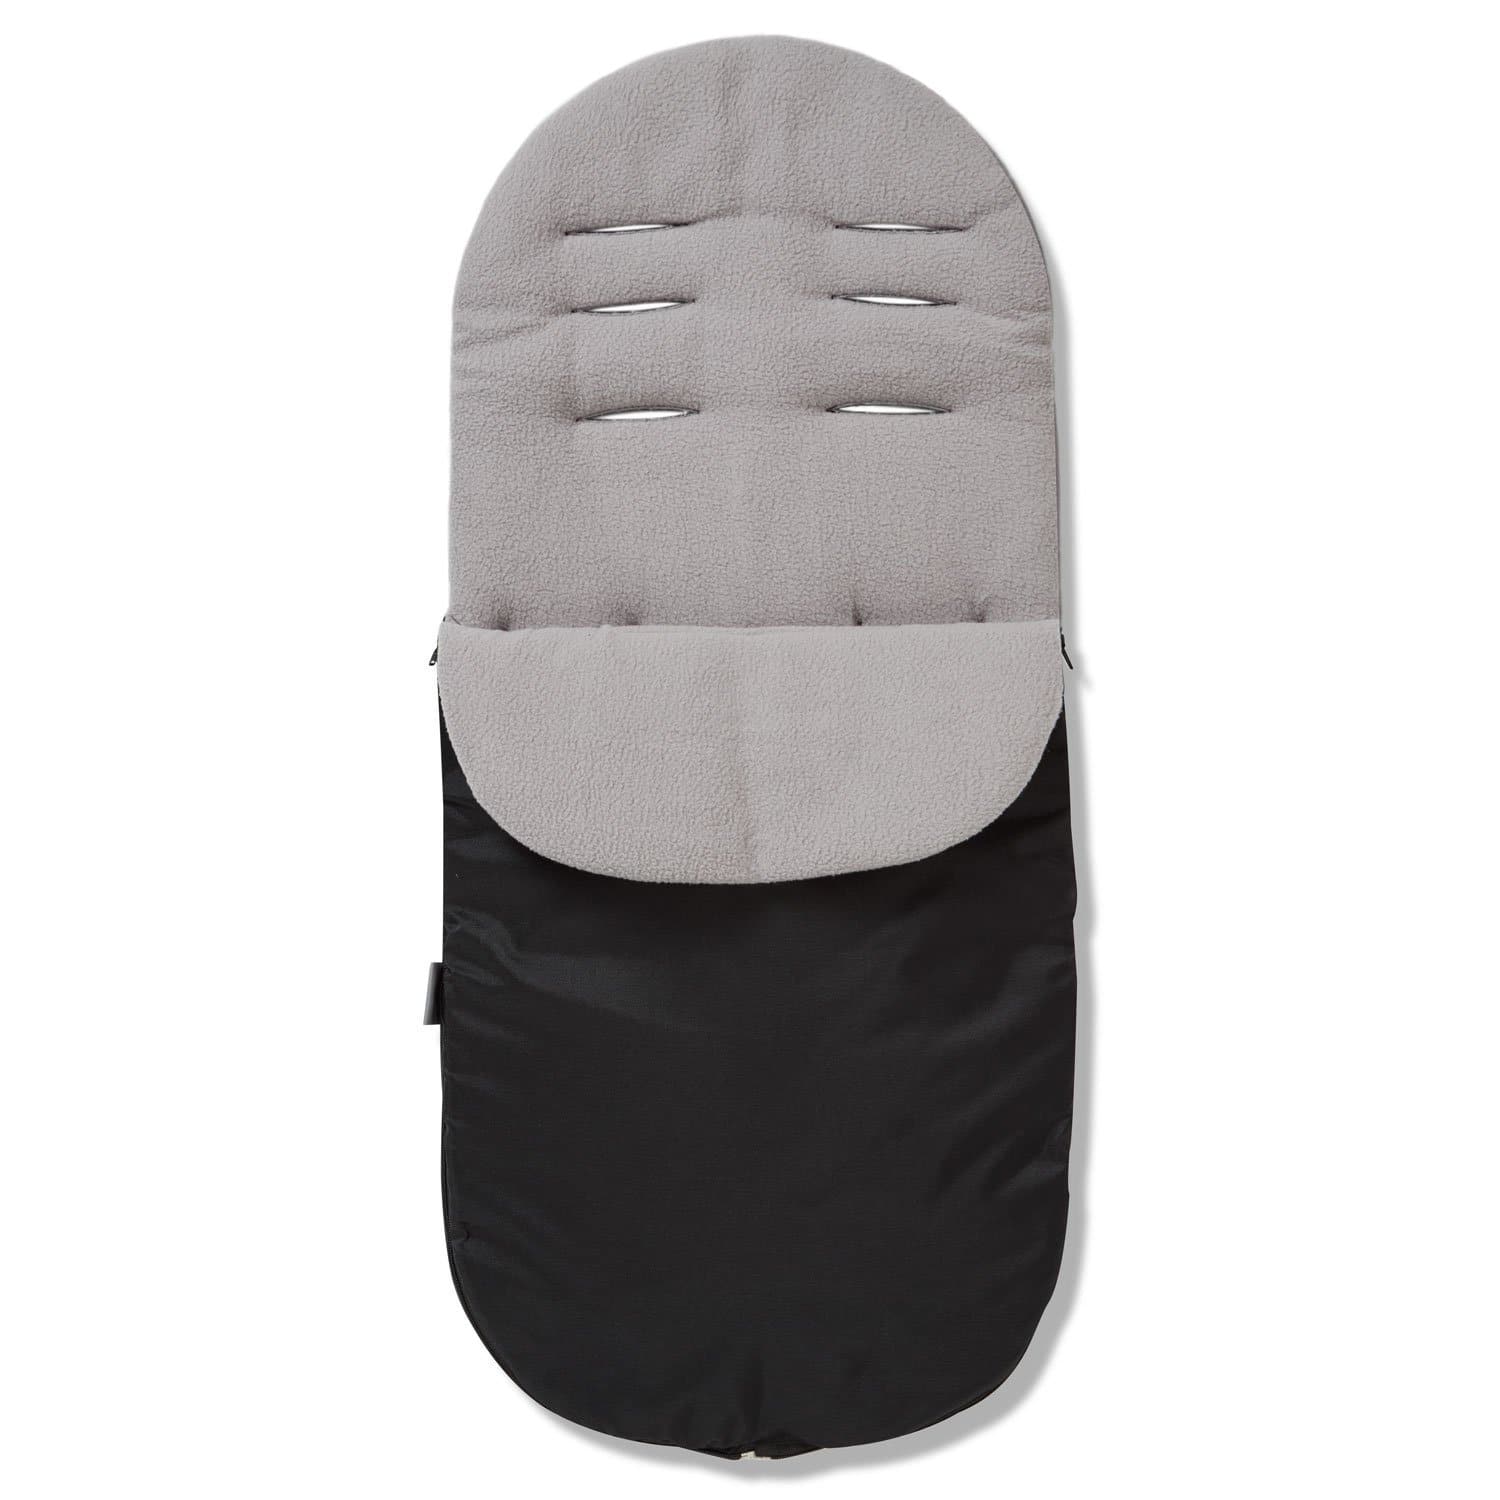 Footmuff / Cosy Toes Compatible with Urban Detour - Grey / Fits All Models | For Your Little One